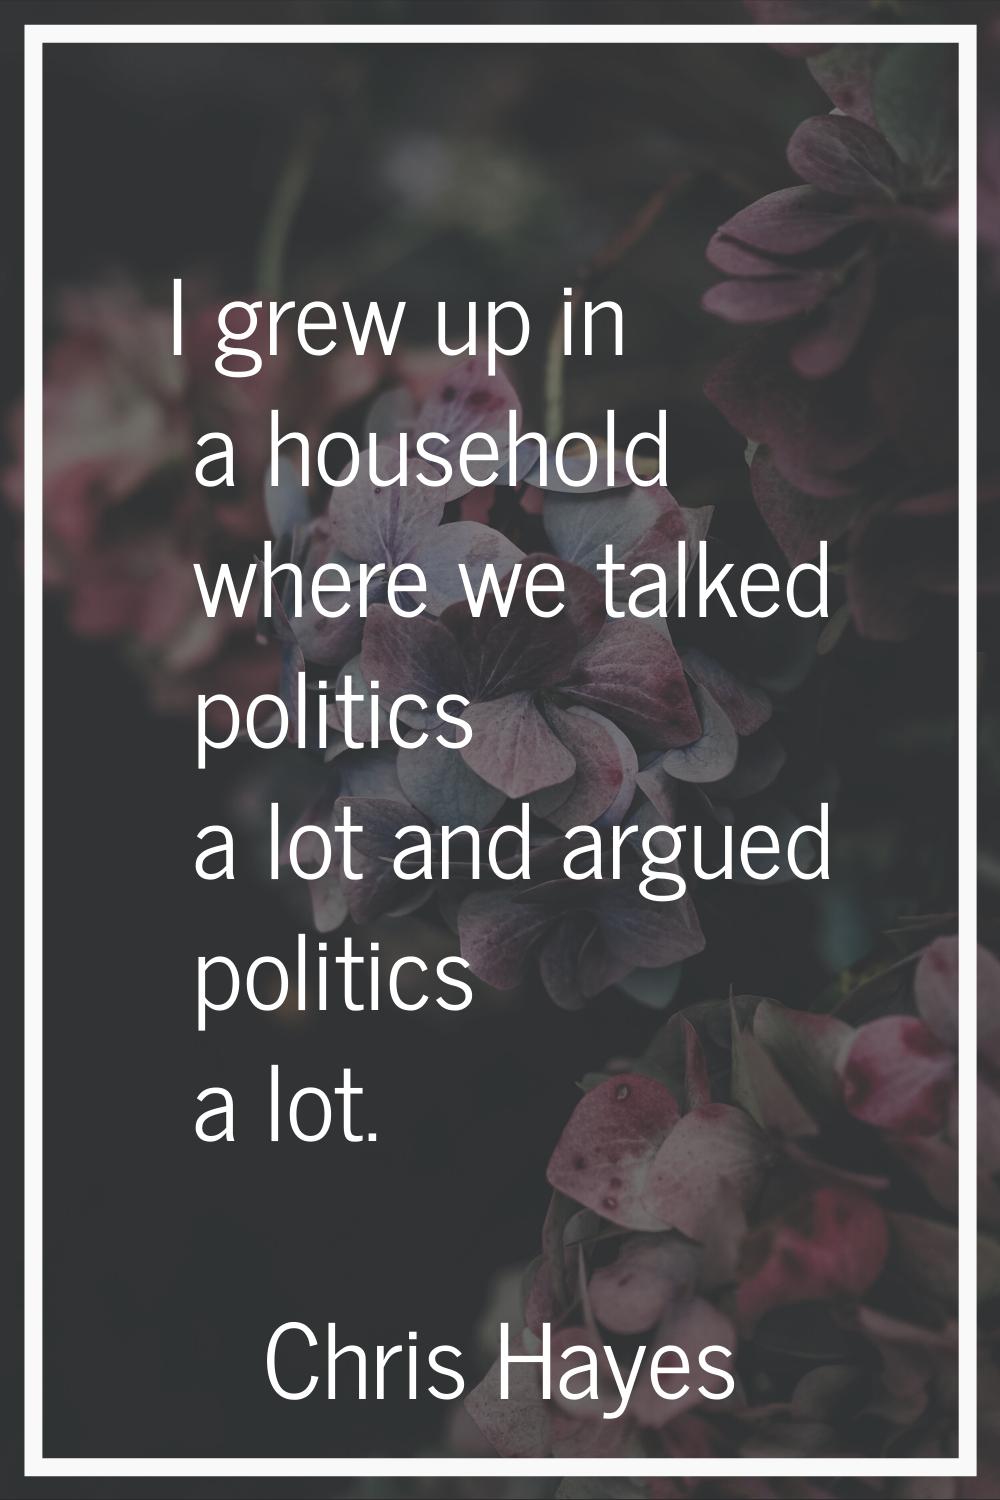 I grew up in a household where we talked politics a lot and argued politics a lot.